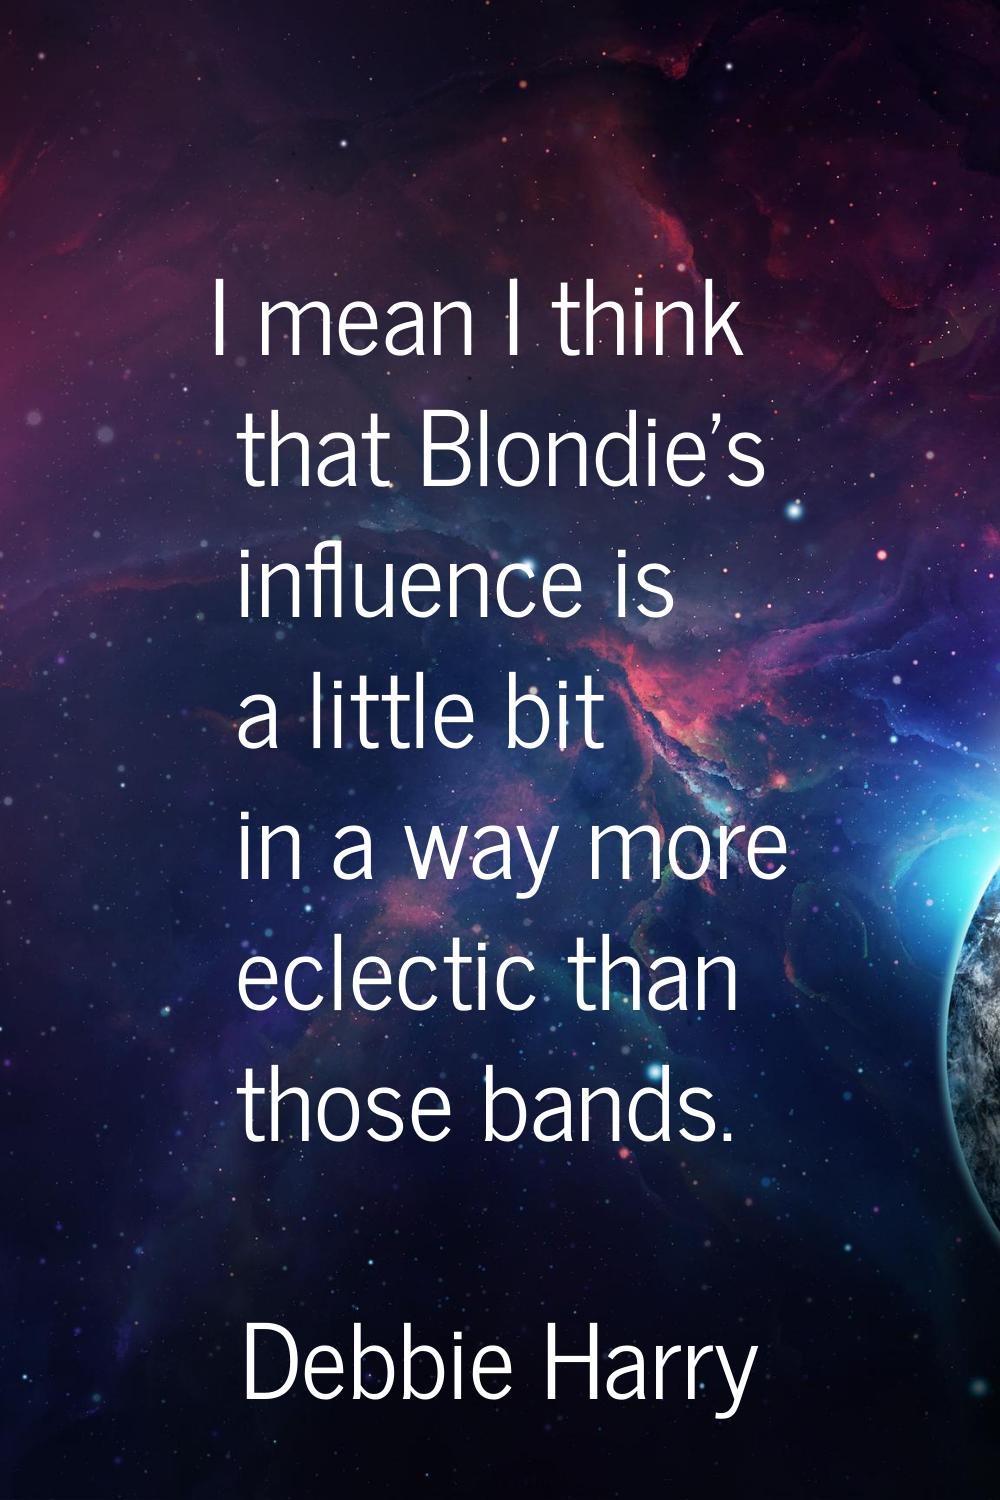 I mean I think that Blondie's influence is a little bit in a way more eclectic than those bands.